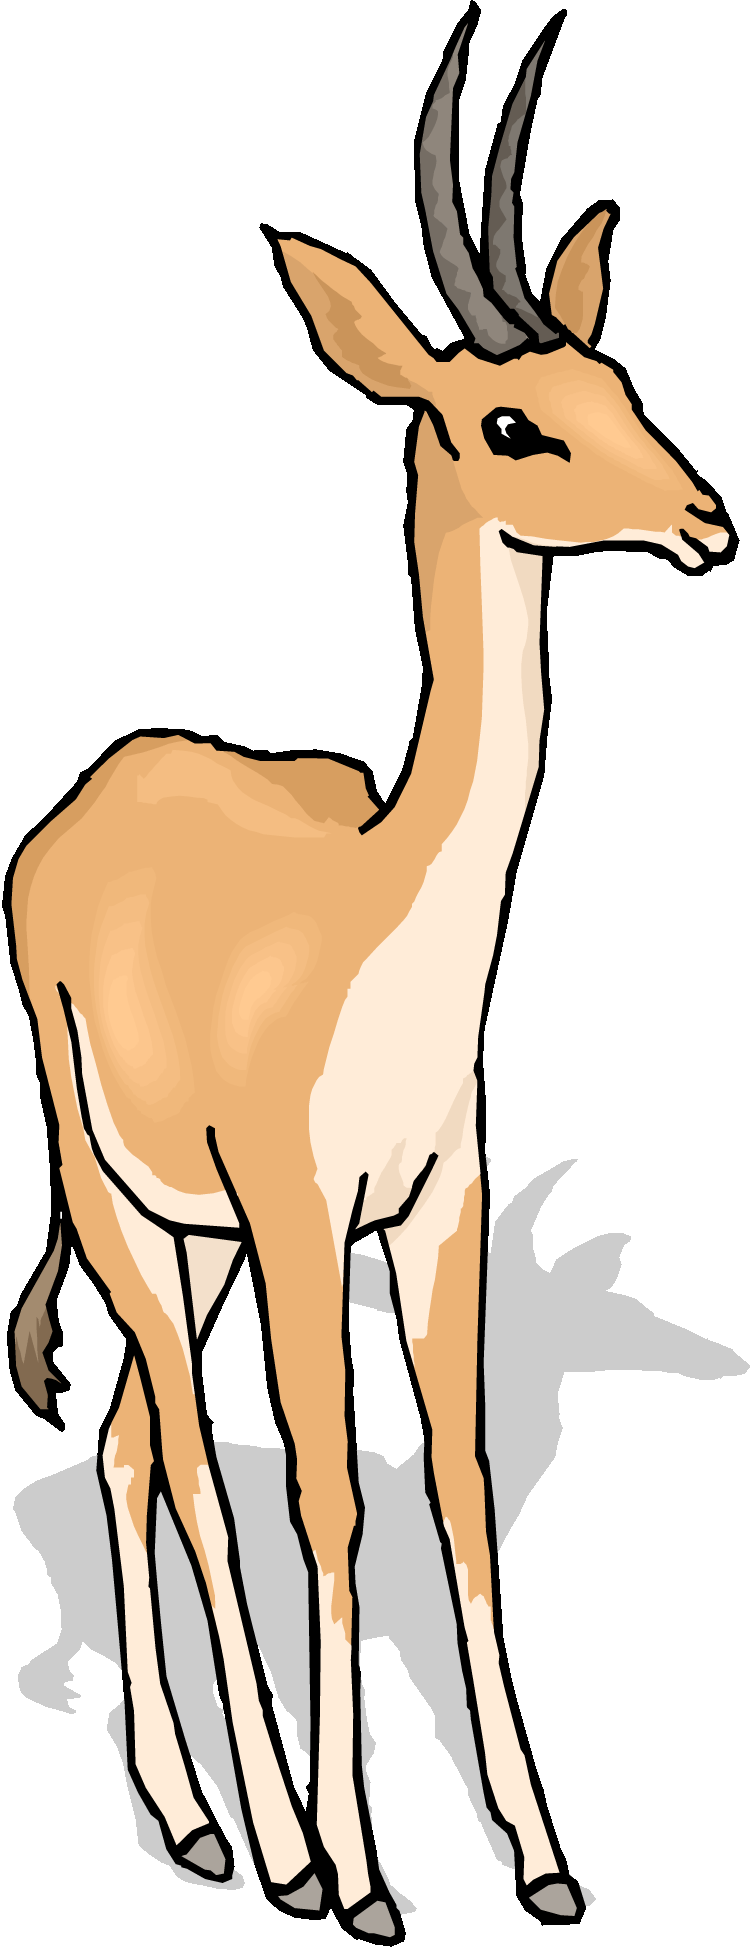 Gazelle clipart #5, Download drawings